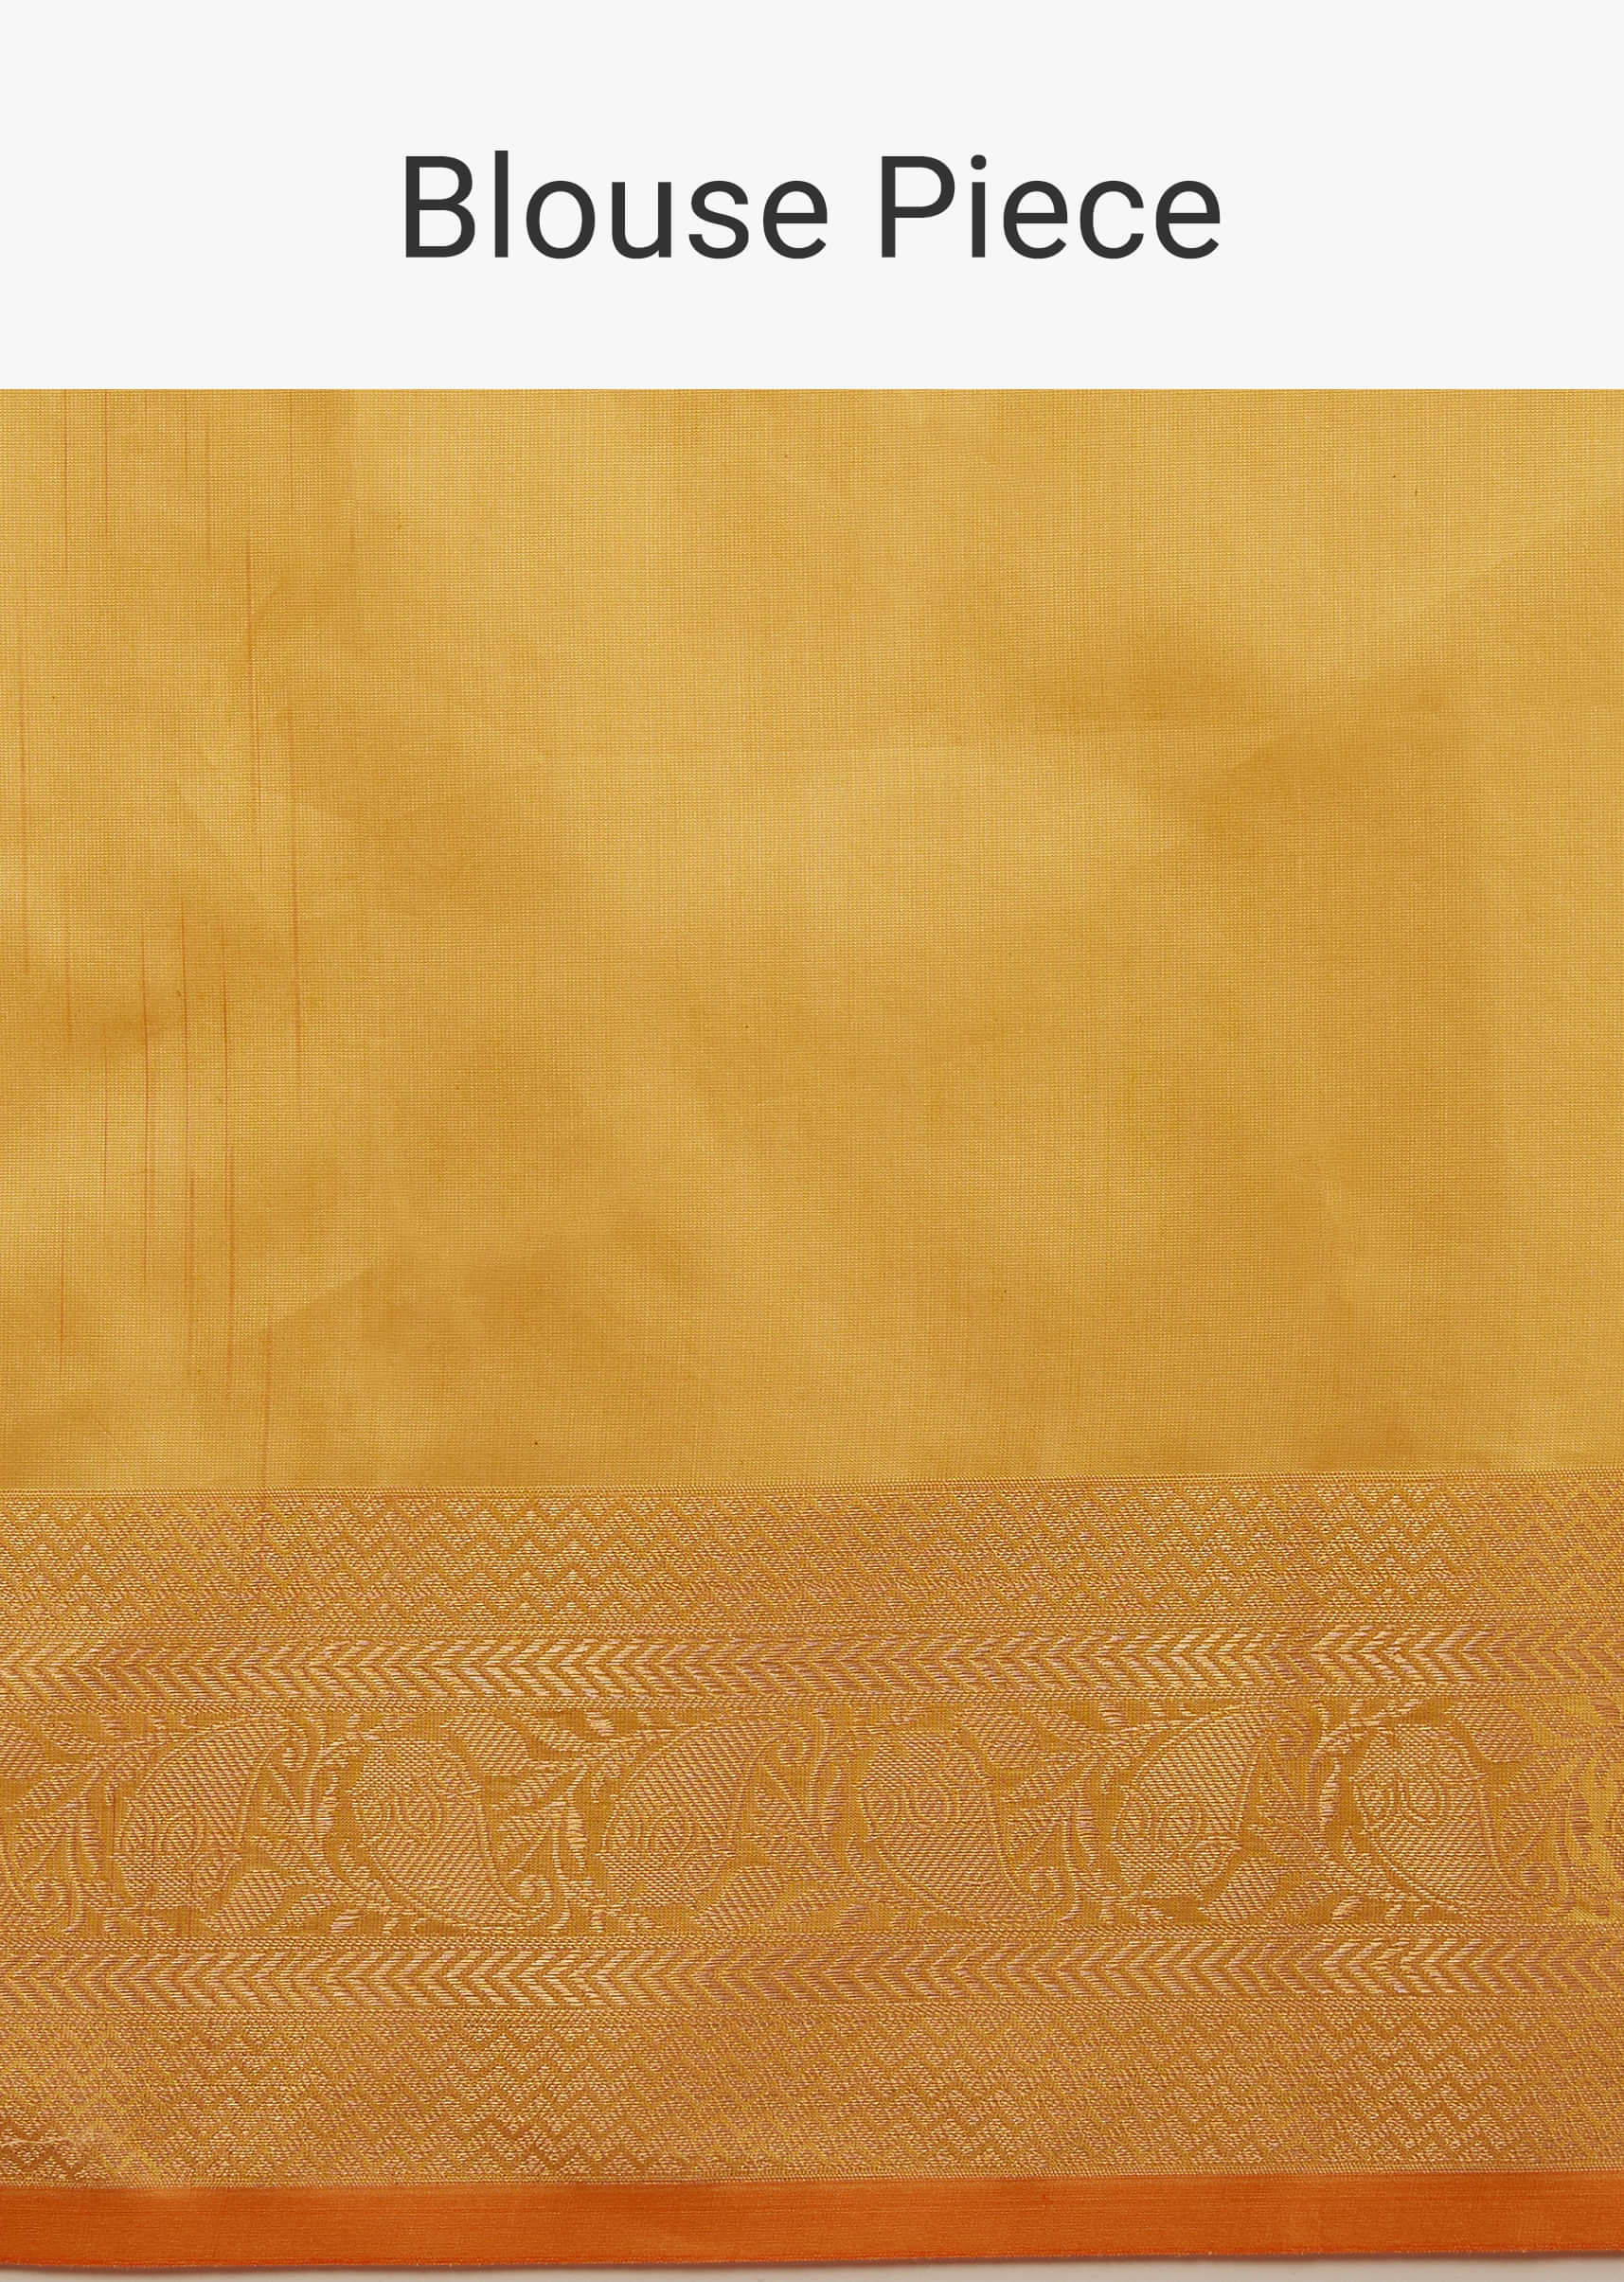 Apricot Yellow Saree In Organza Silk With Woven Floral Jaal In Shades Of White And Gold Along With Unstitched Blouse  